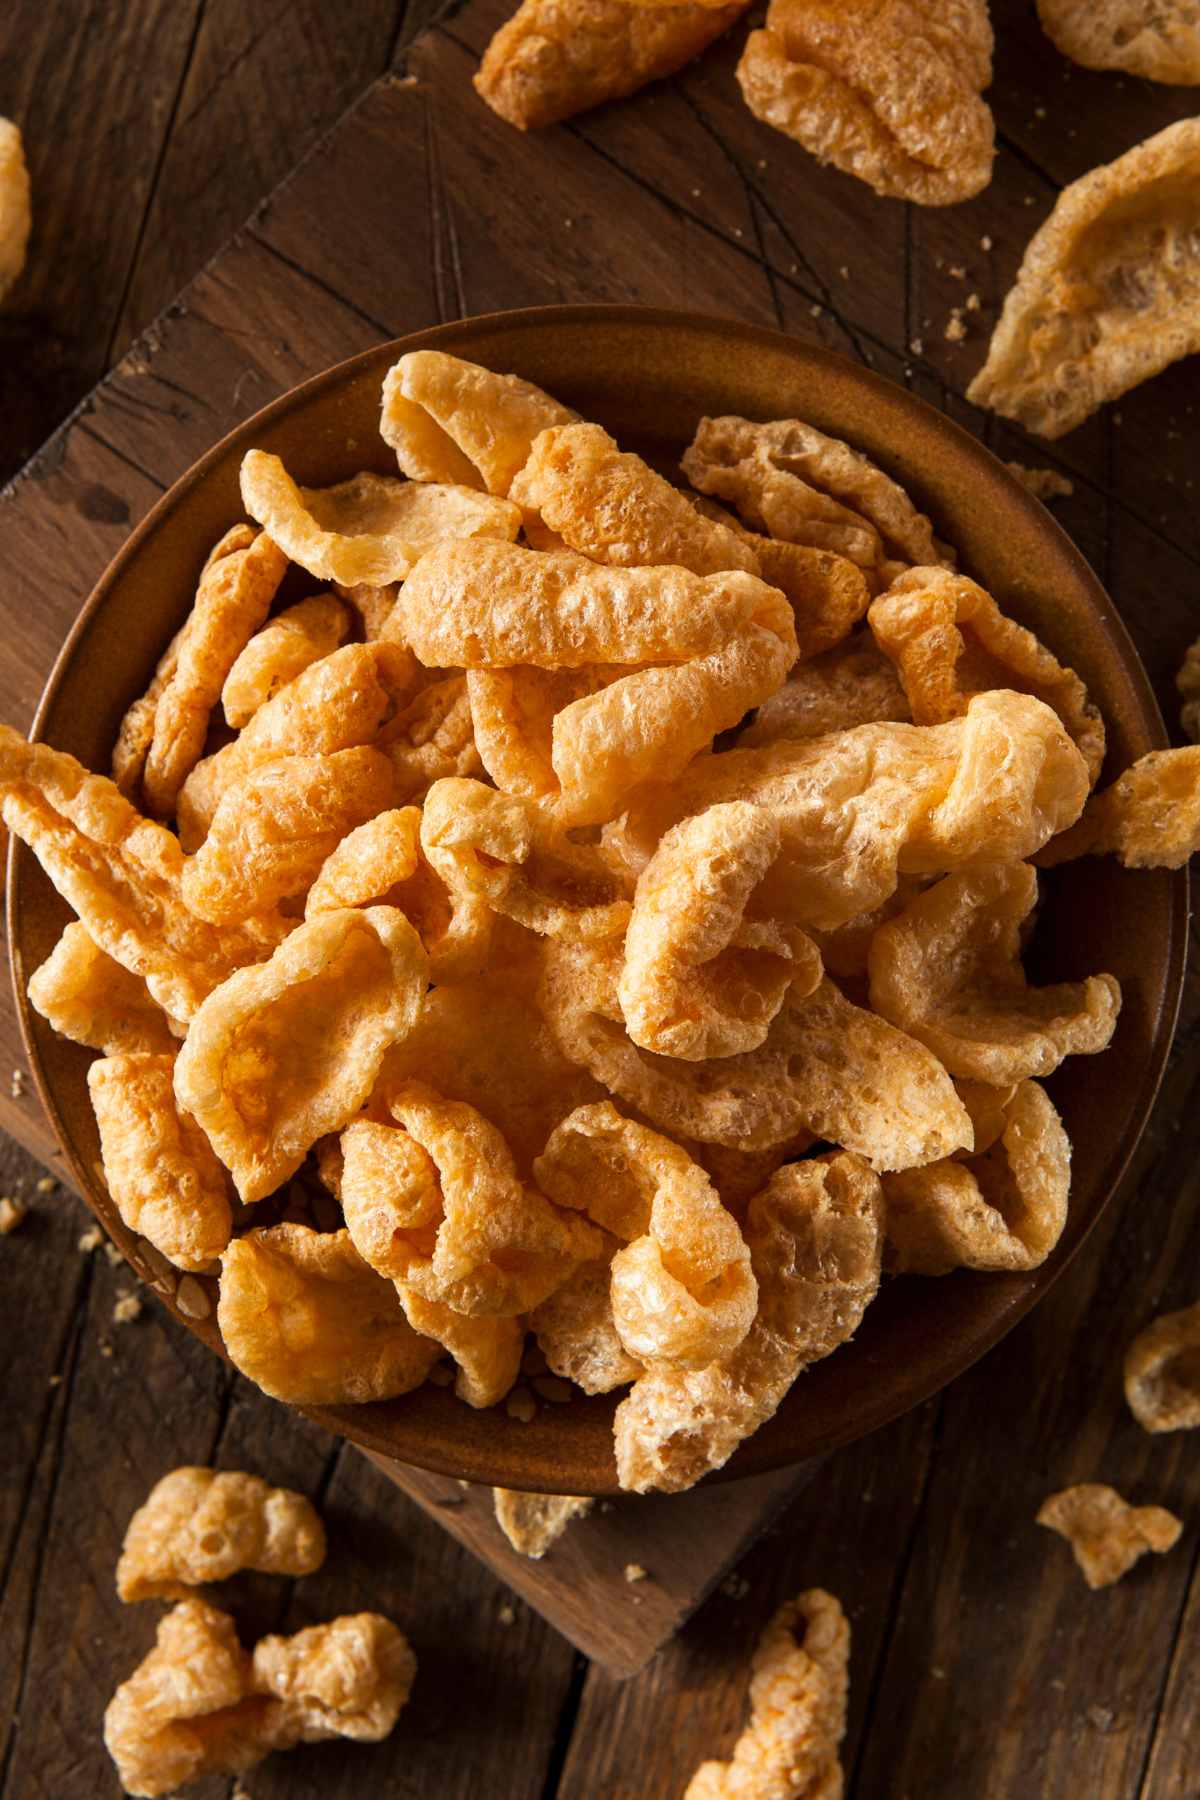 Are pork rinds keto? How many carbs are in pork rinds? Many people cannot resist crispy and delicious pork rinds, and they’re a popular snack option. In this post, you’ll find out if they’re healthy and whether you can eat them on the keto diet.